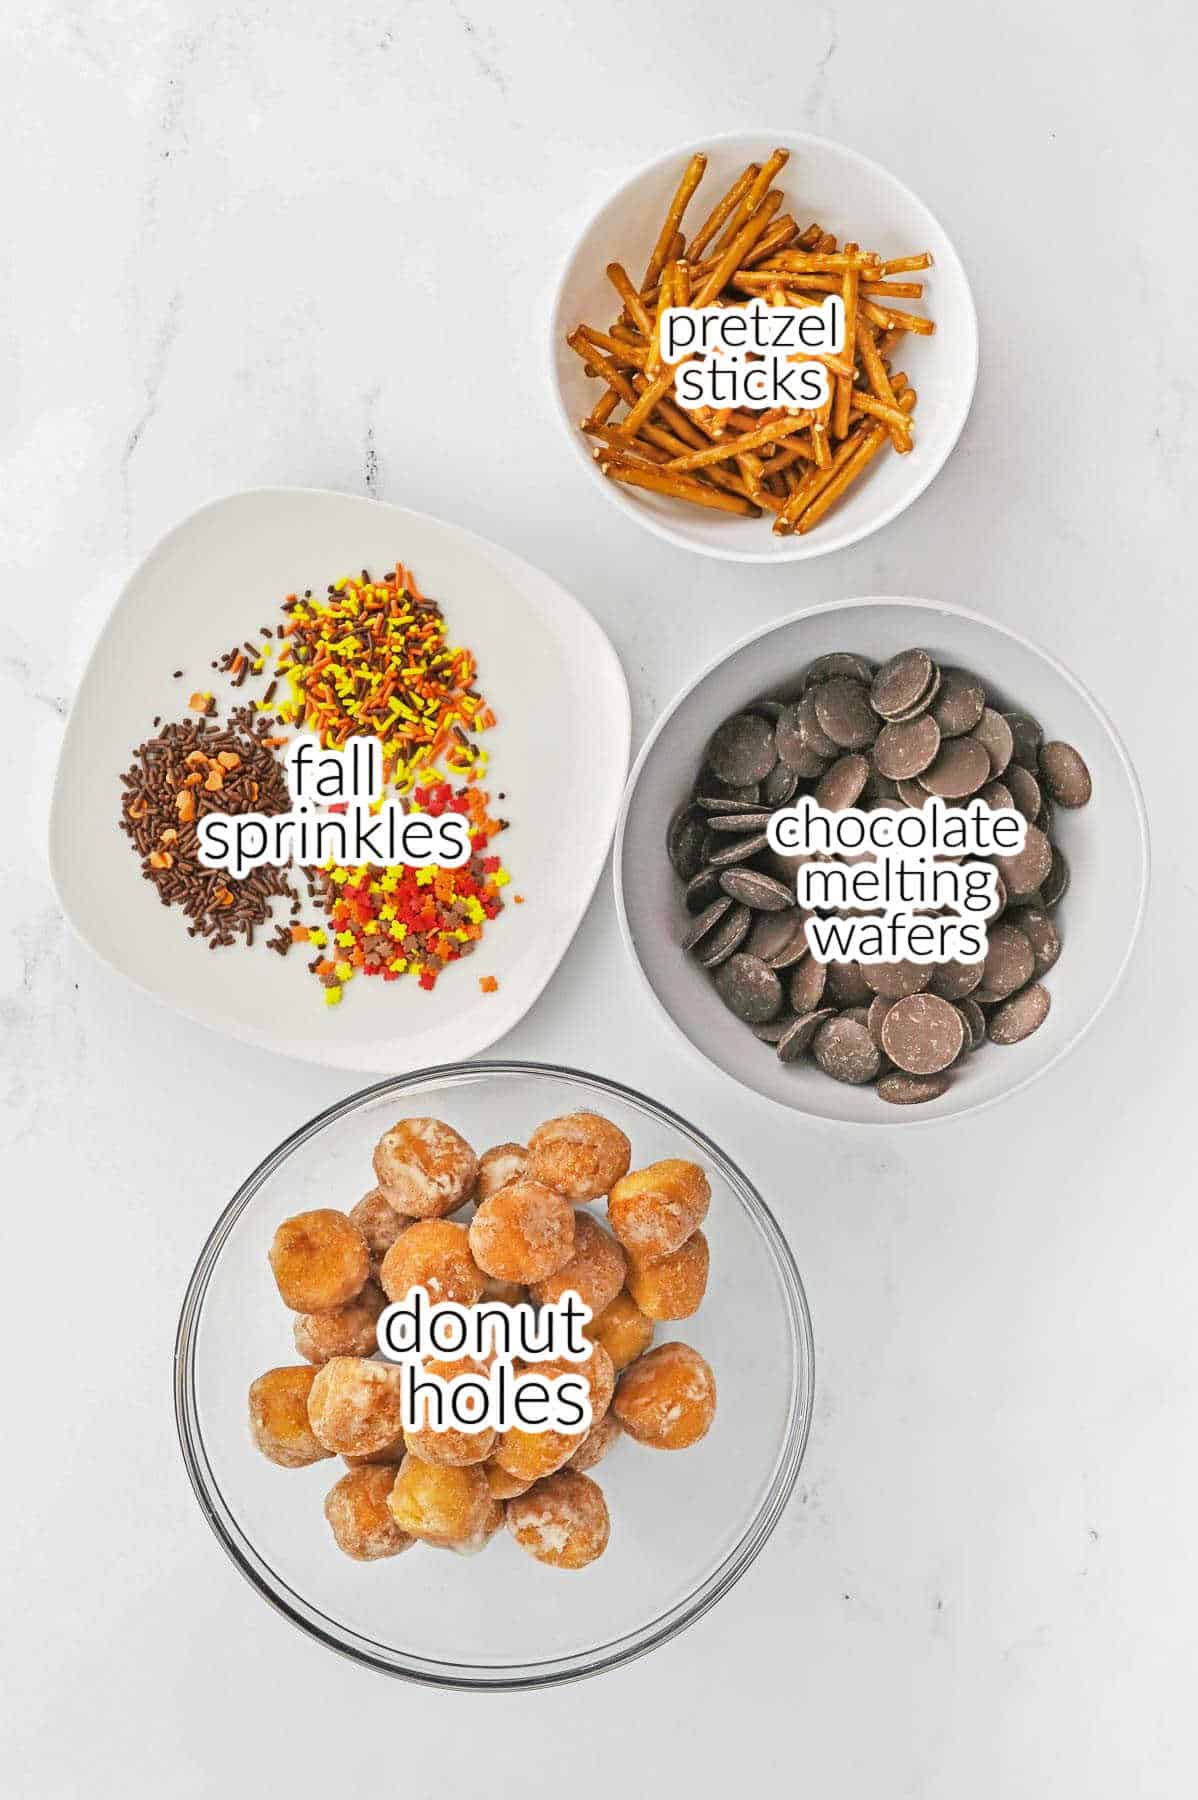 Donut holes, chocolate wafers, pretzel sticks and fall sprinkles in a white bowls.